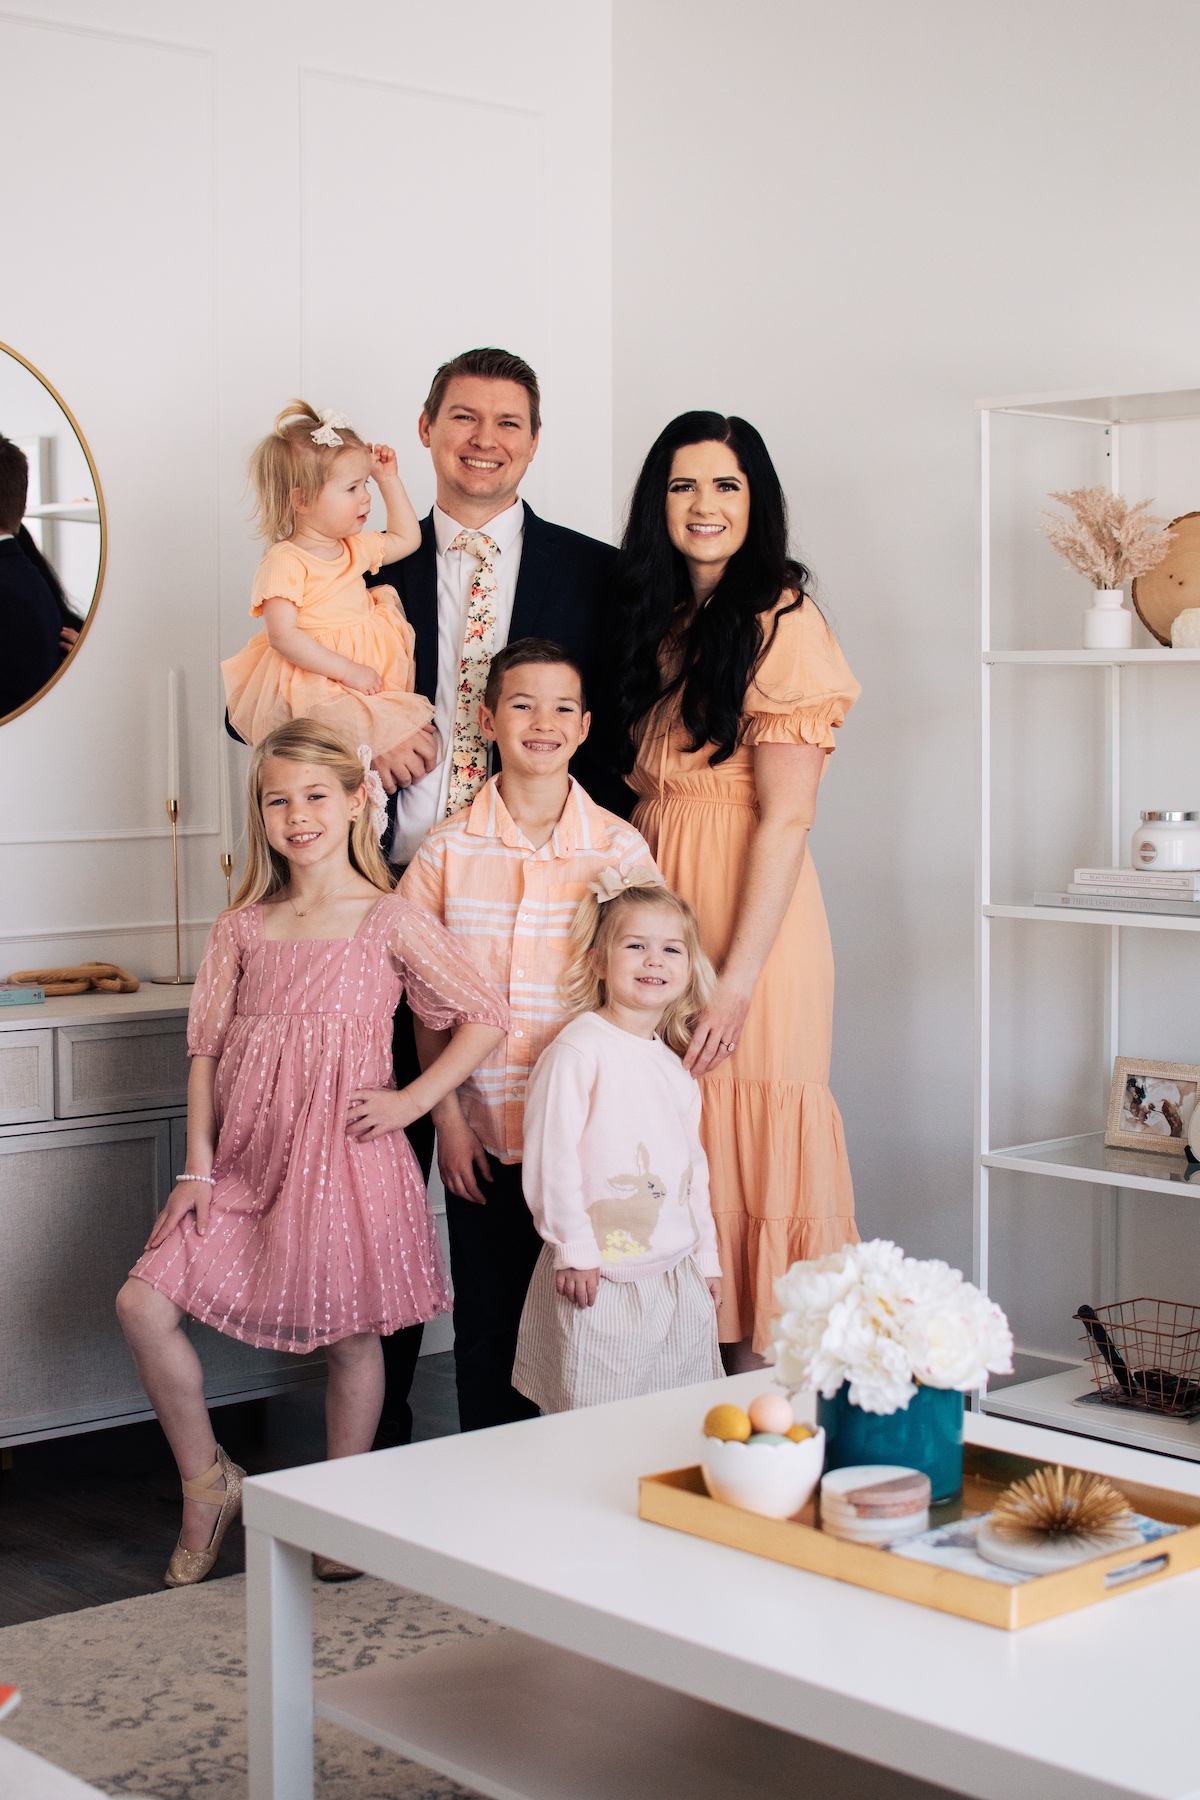 Jessica Ashcroft poses with her family of four kids in her home.